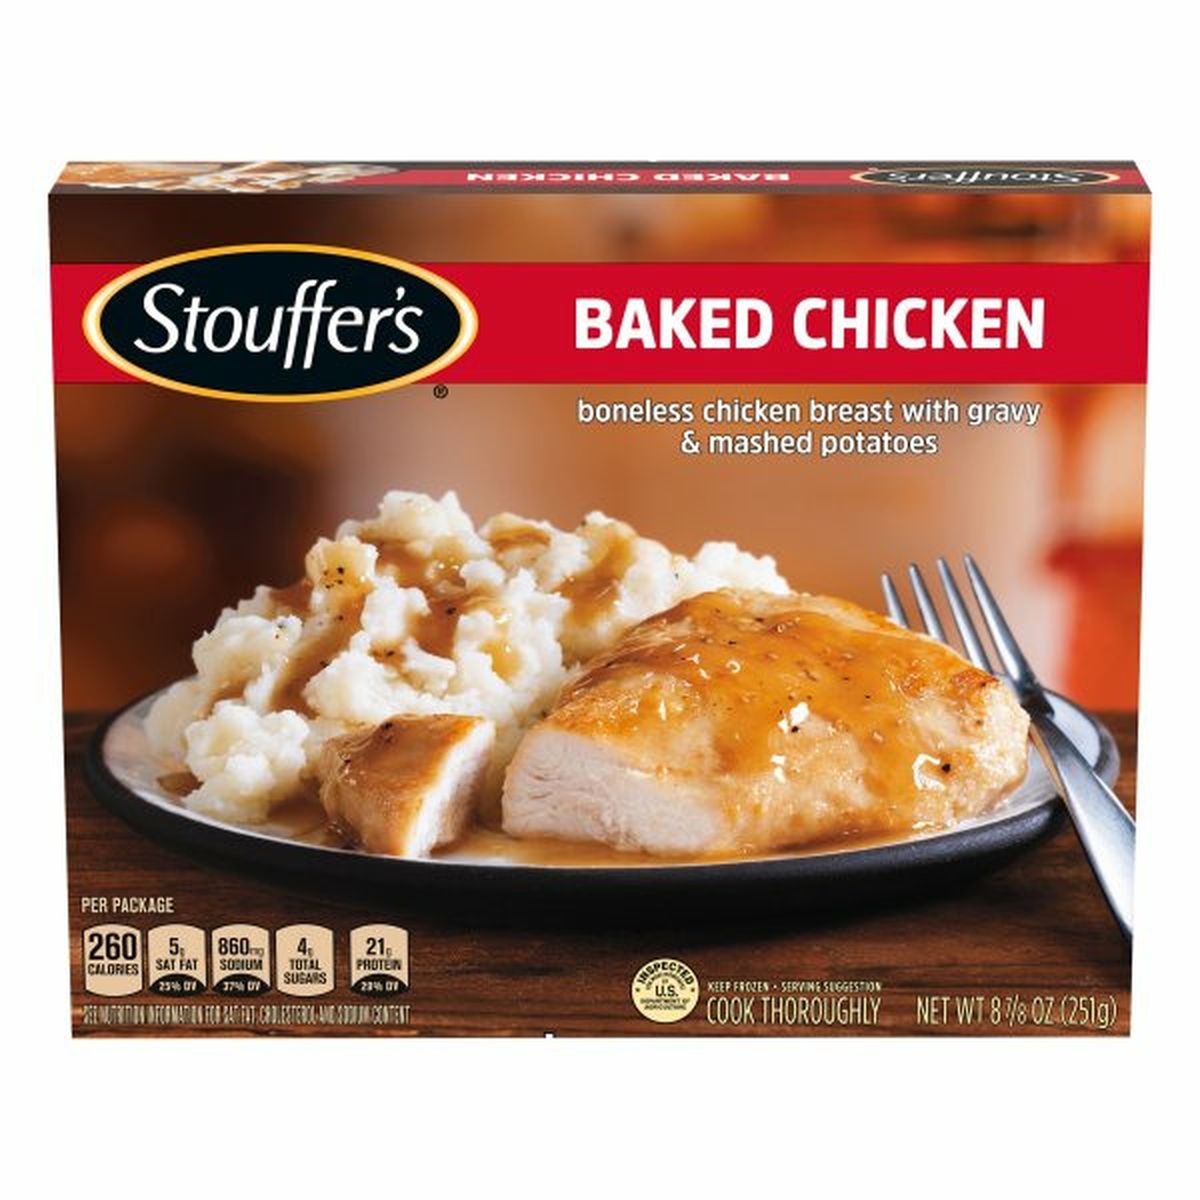 Calories in Stouffer's Baked Chicken